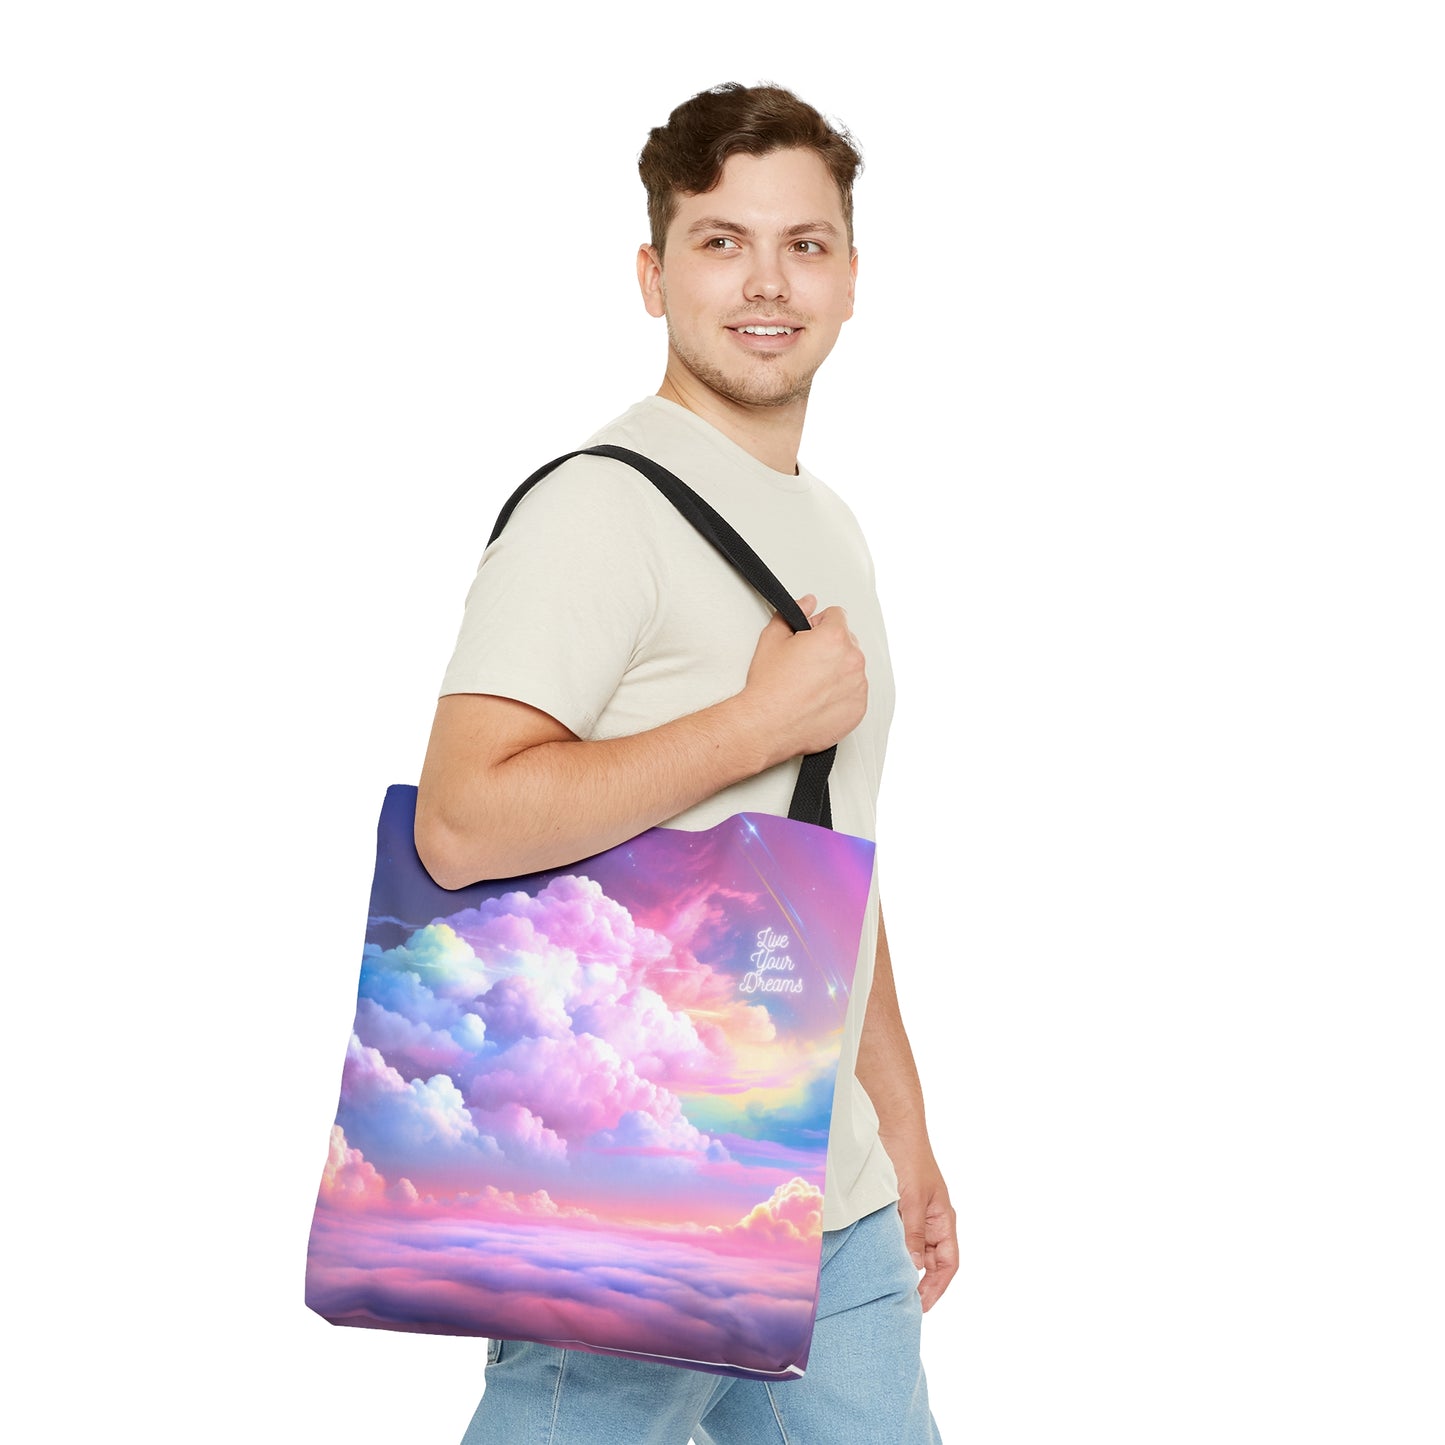 Rainbow Dreams Tote Bag From Big Fairy Tales By Schatar